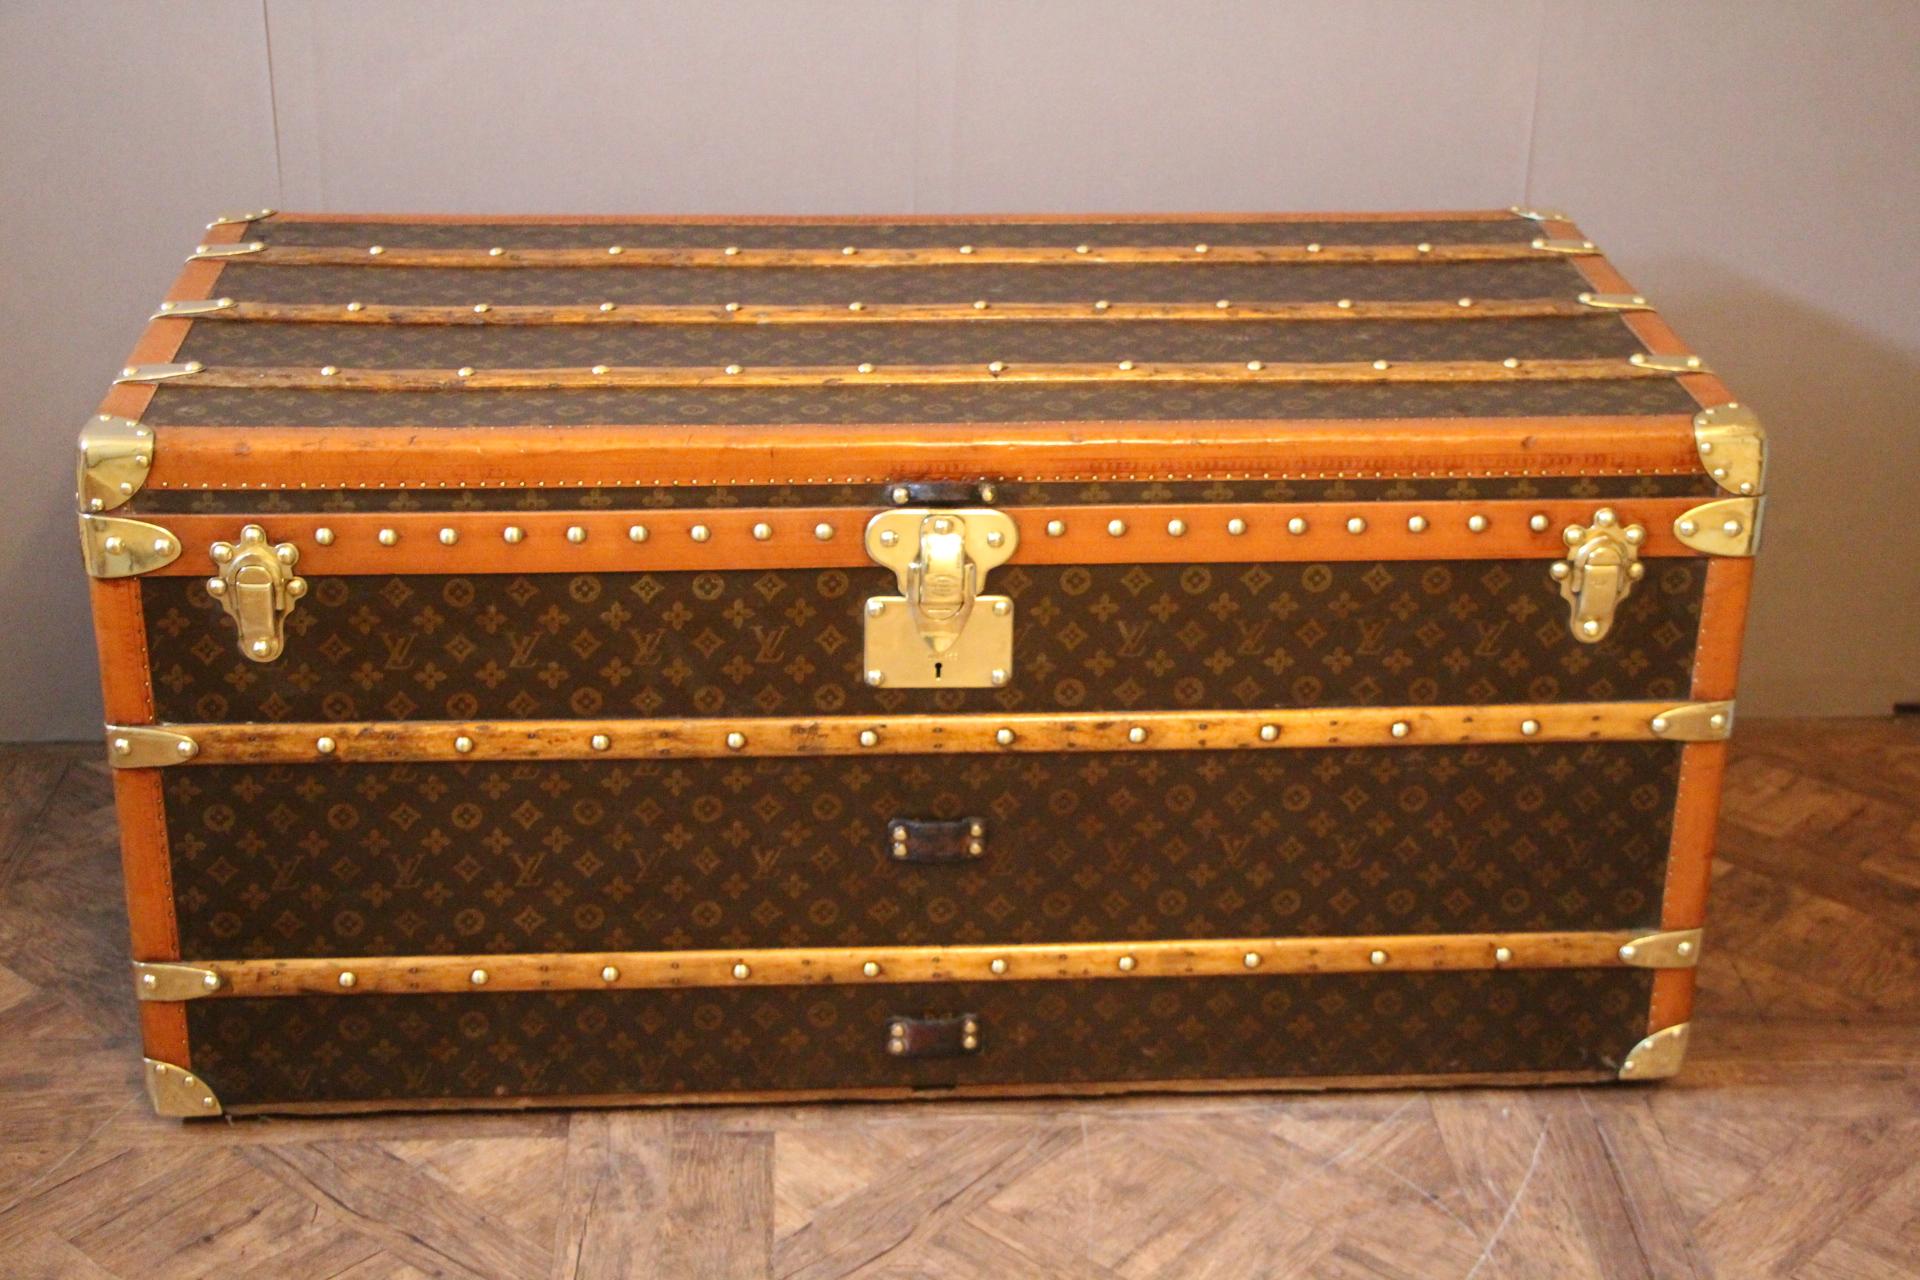 This beautiful Louis Vuitton trunk is all stenciled LV monogram canvas, with all Louis Vuitton stamped brass hardware and lozine trim. It features large leather side handles as well as a customized French flag on each side. It has got a very warm